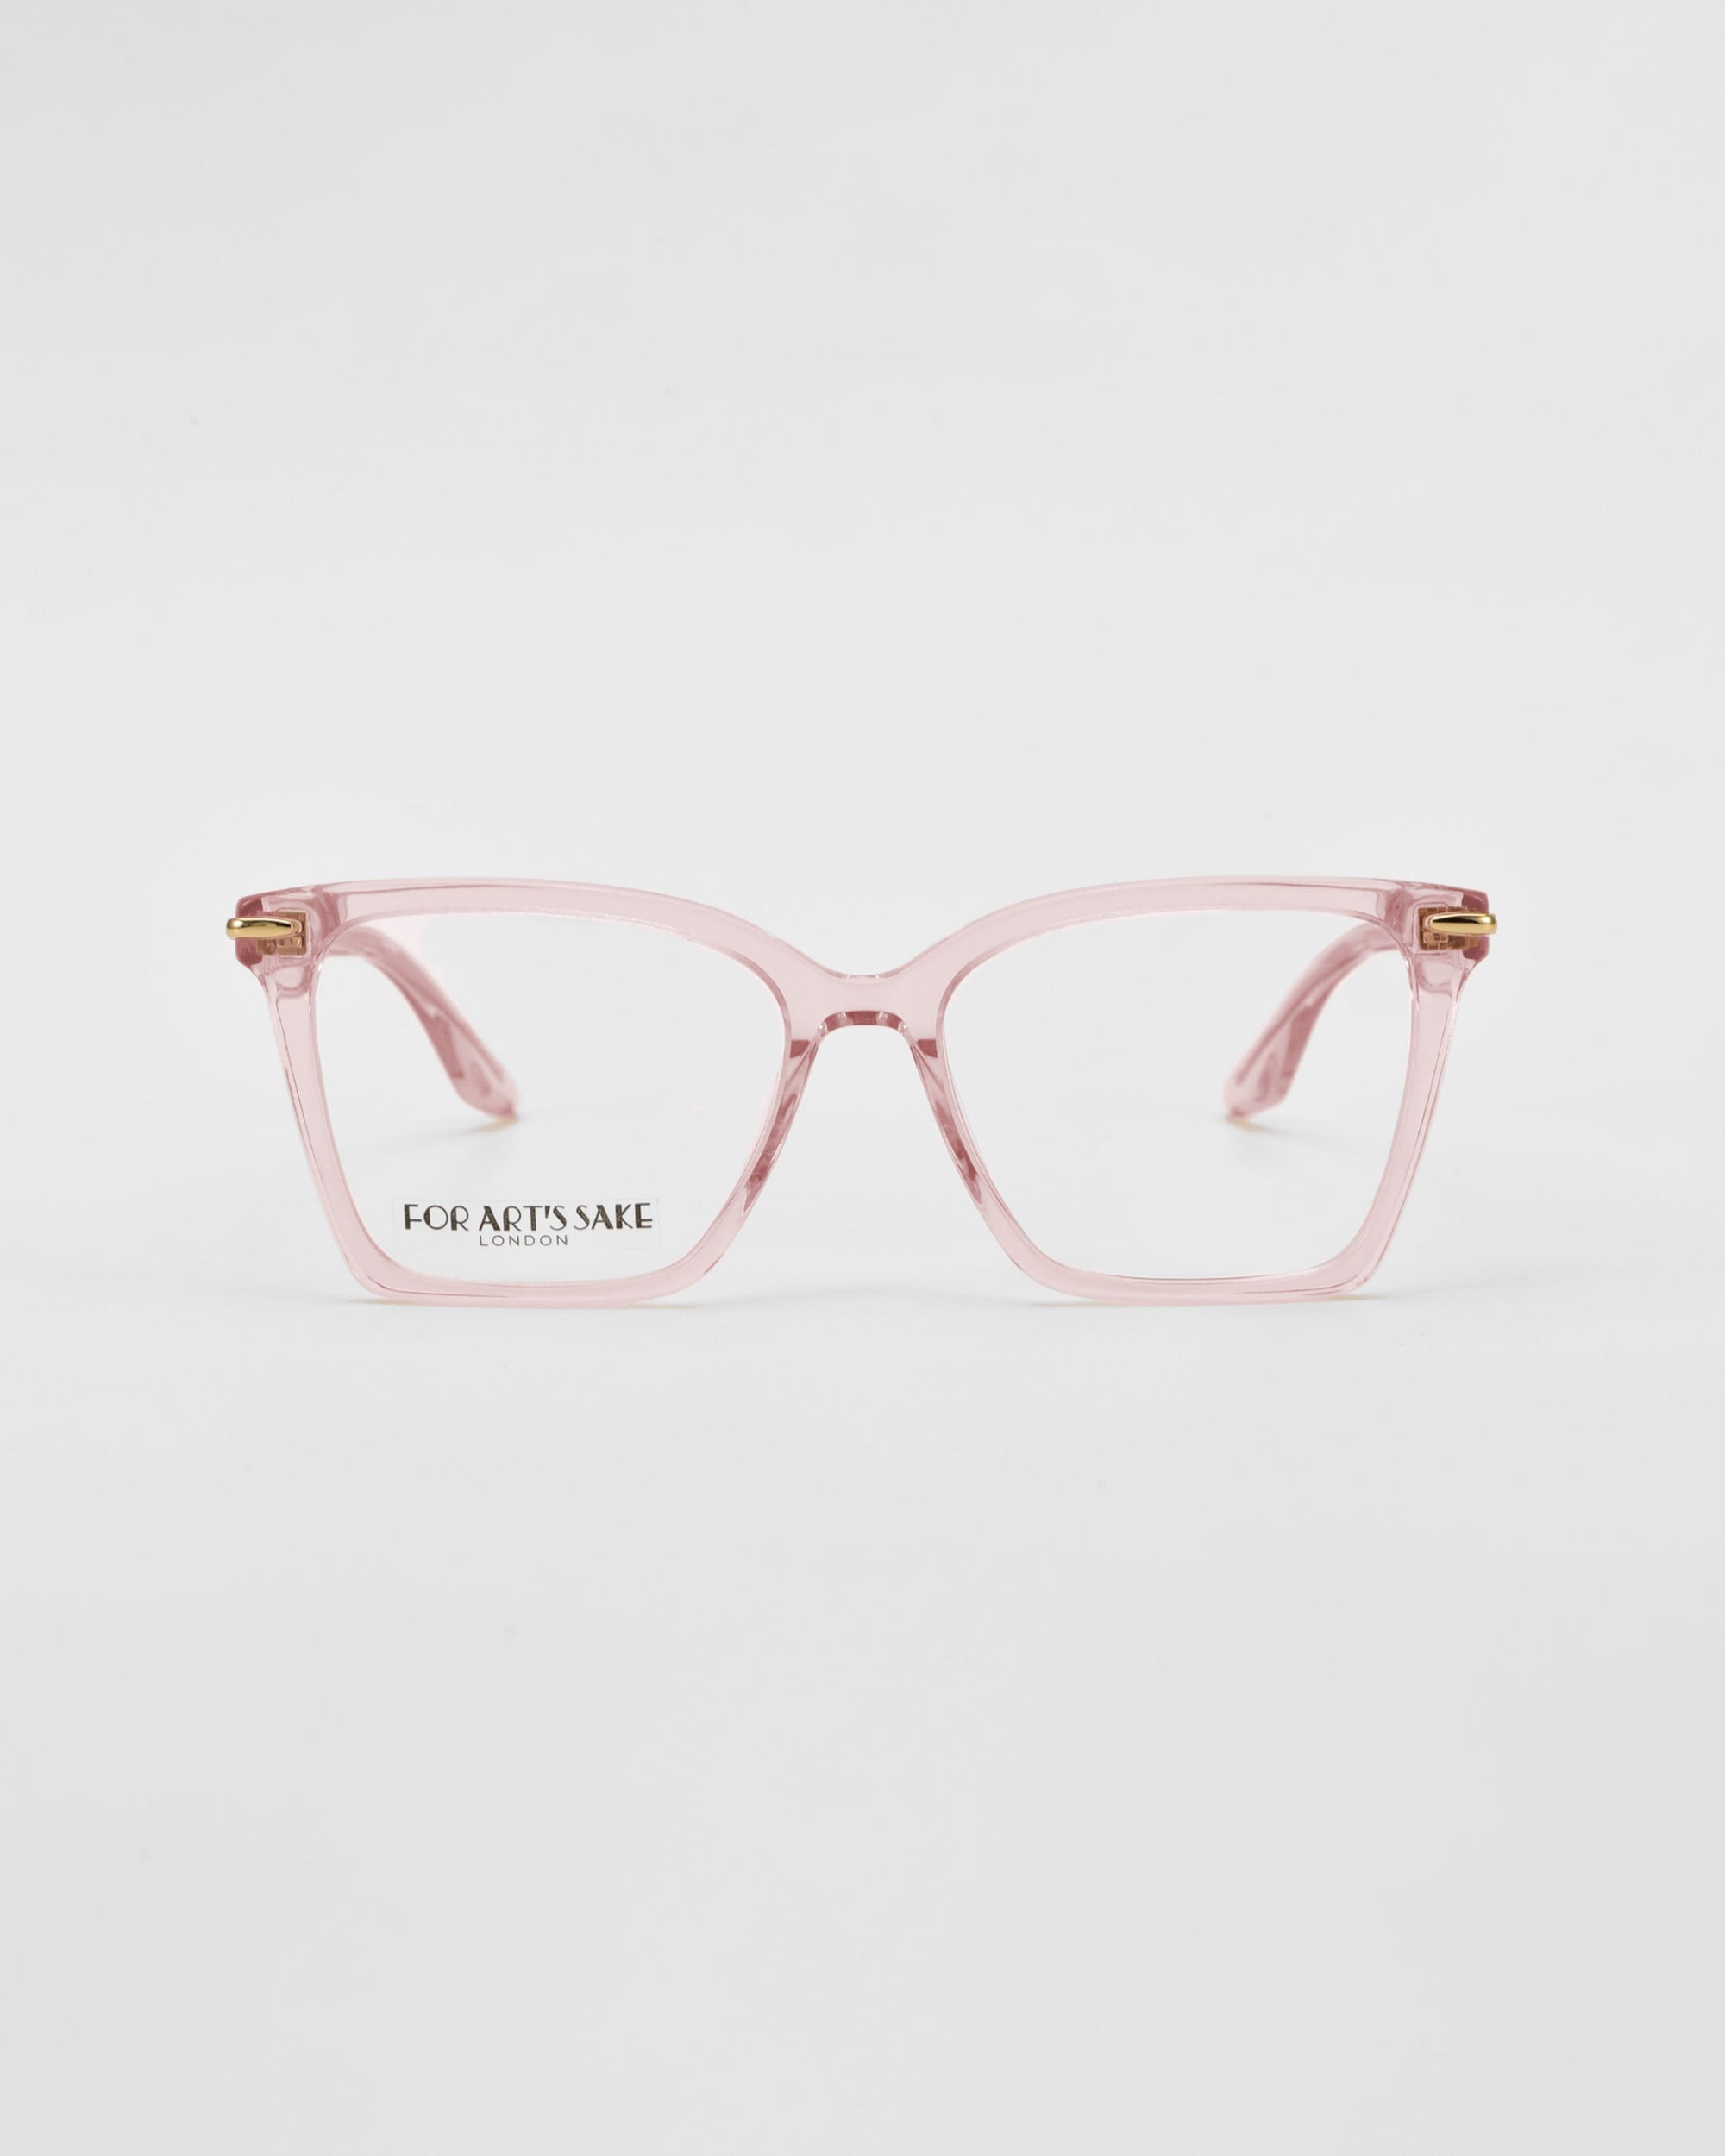 A pair of light pink eyeglasses with a slight cat-eye shape and gold accents on the temples, crafted from glossy acetate. The phrase &quot;For Art&#39;s Sake® Azure&quot; is visible on the inner side of one of the lenses. The background is plain white.